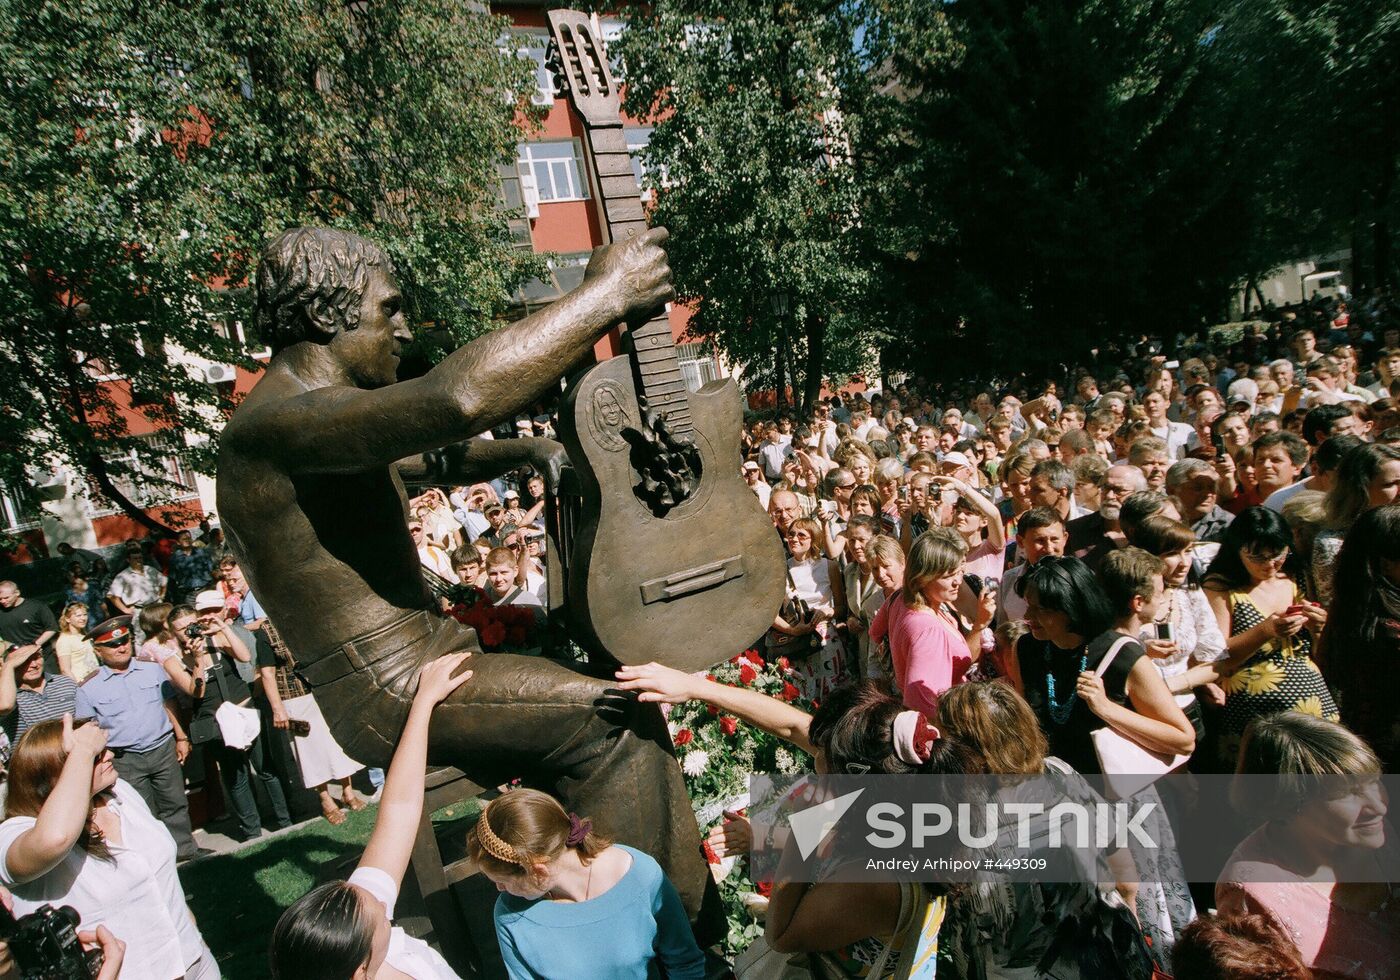 Monument to Vladimir Vysotsky unveiled in Voronezh